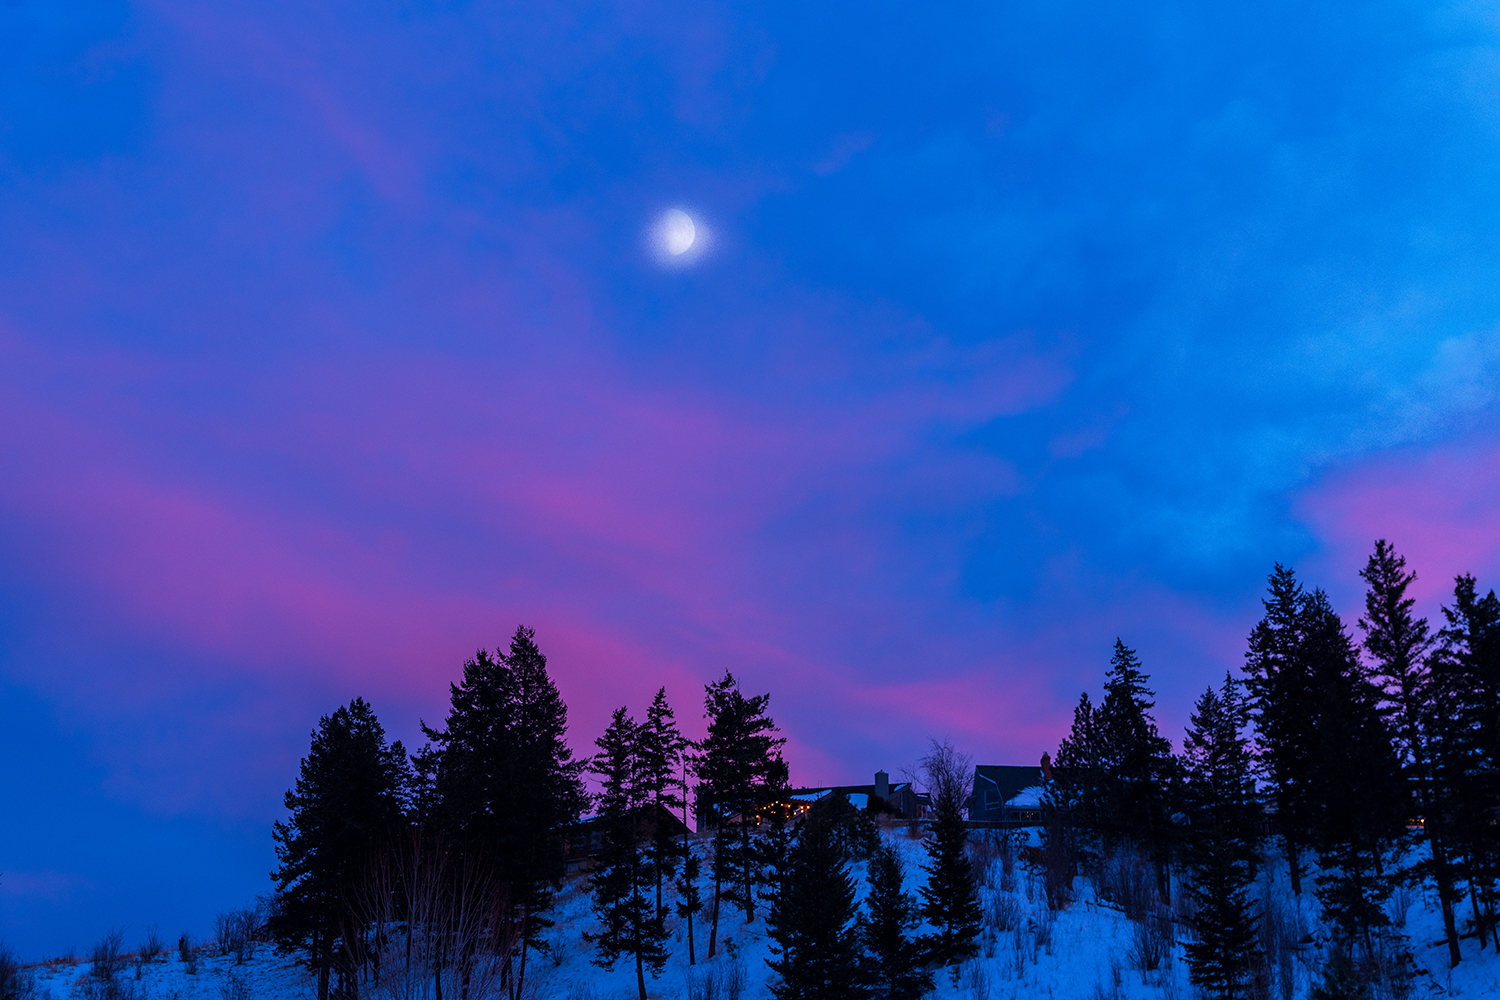 Kamloops Landscape bright blue purple and pink sky with full moon and trees